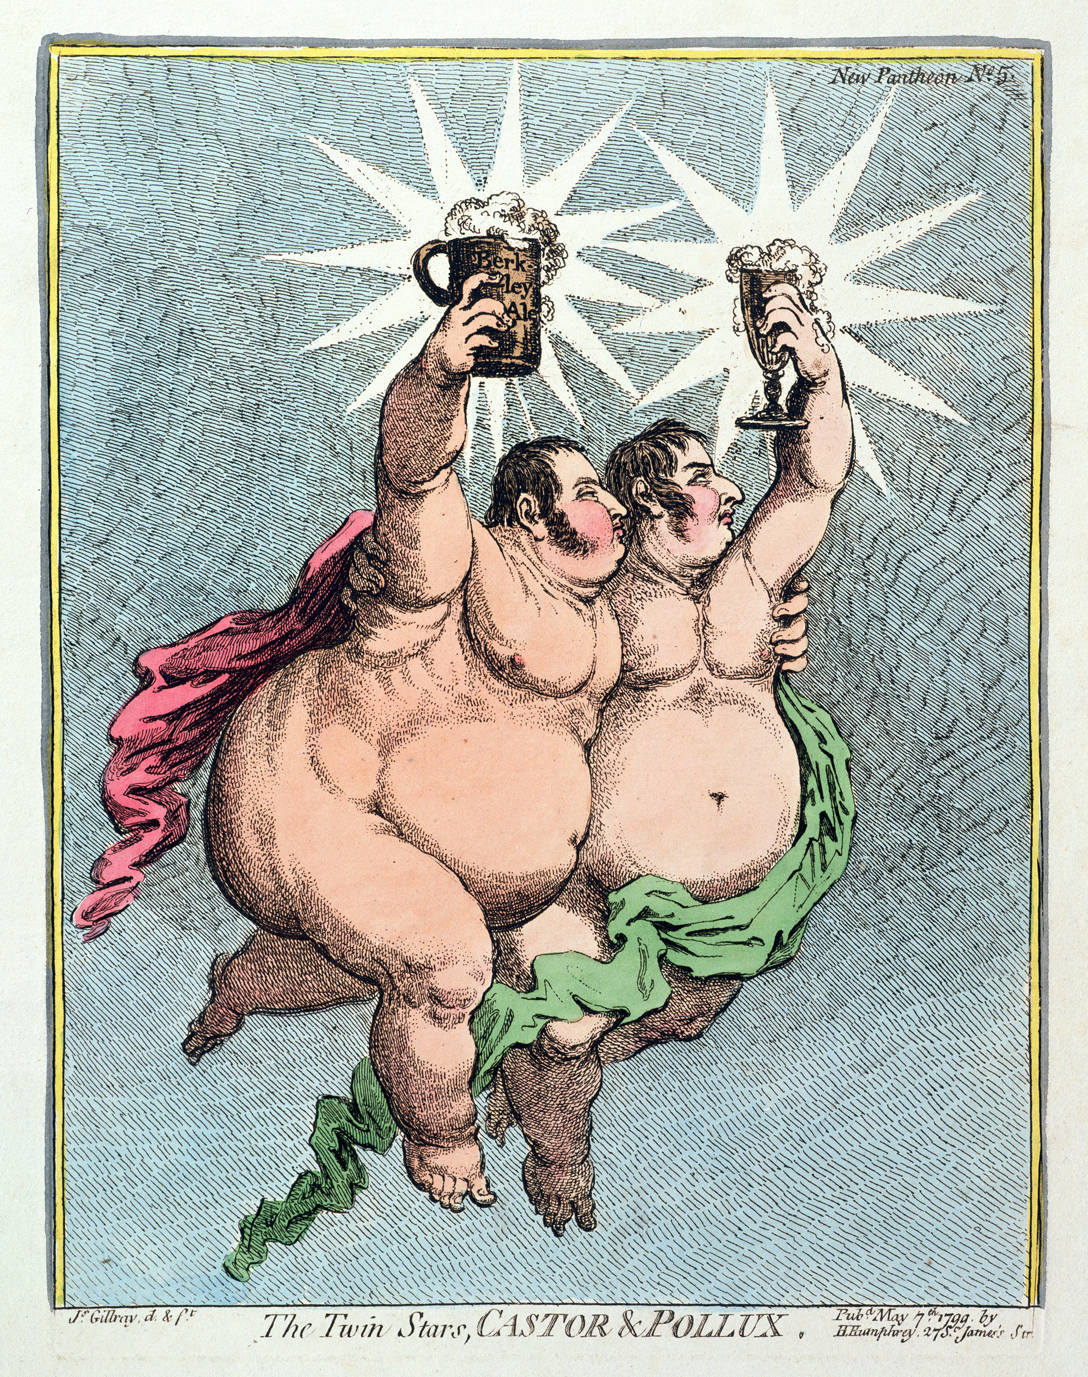 The Twin Stars, Castor & Pollux, by James Gillray, 1799. From a series caricaturing Whig Party members as pagan deities.